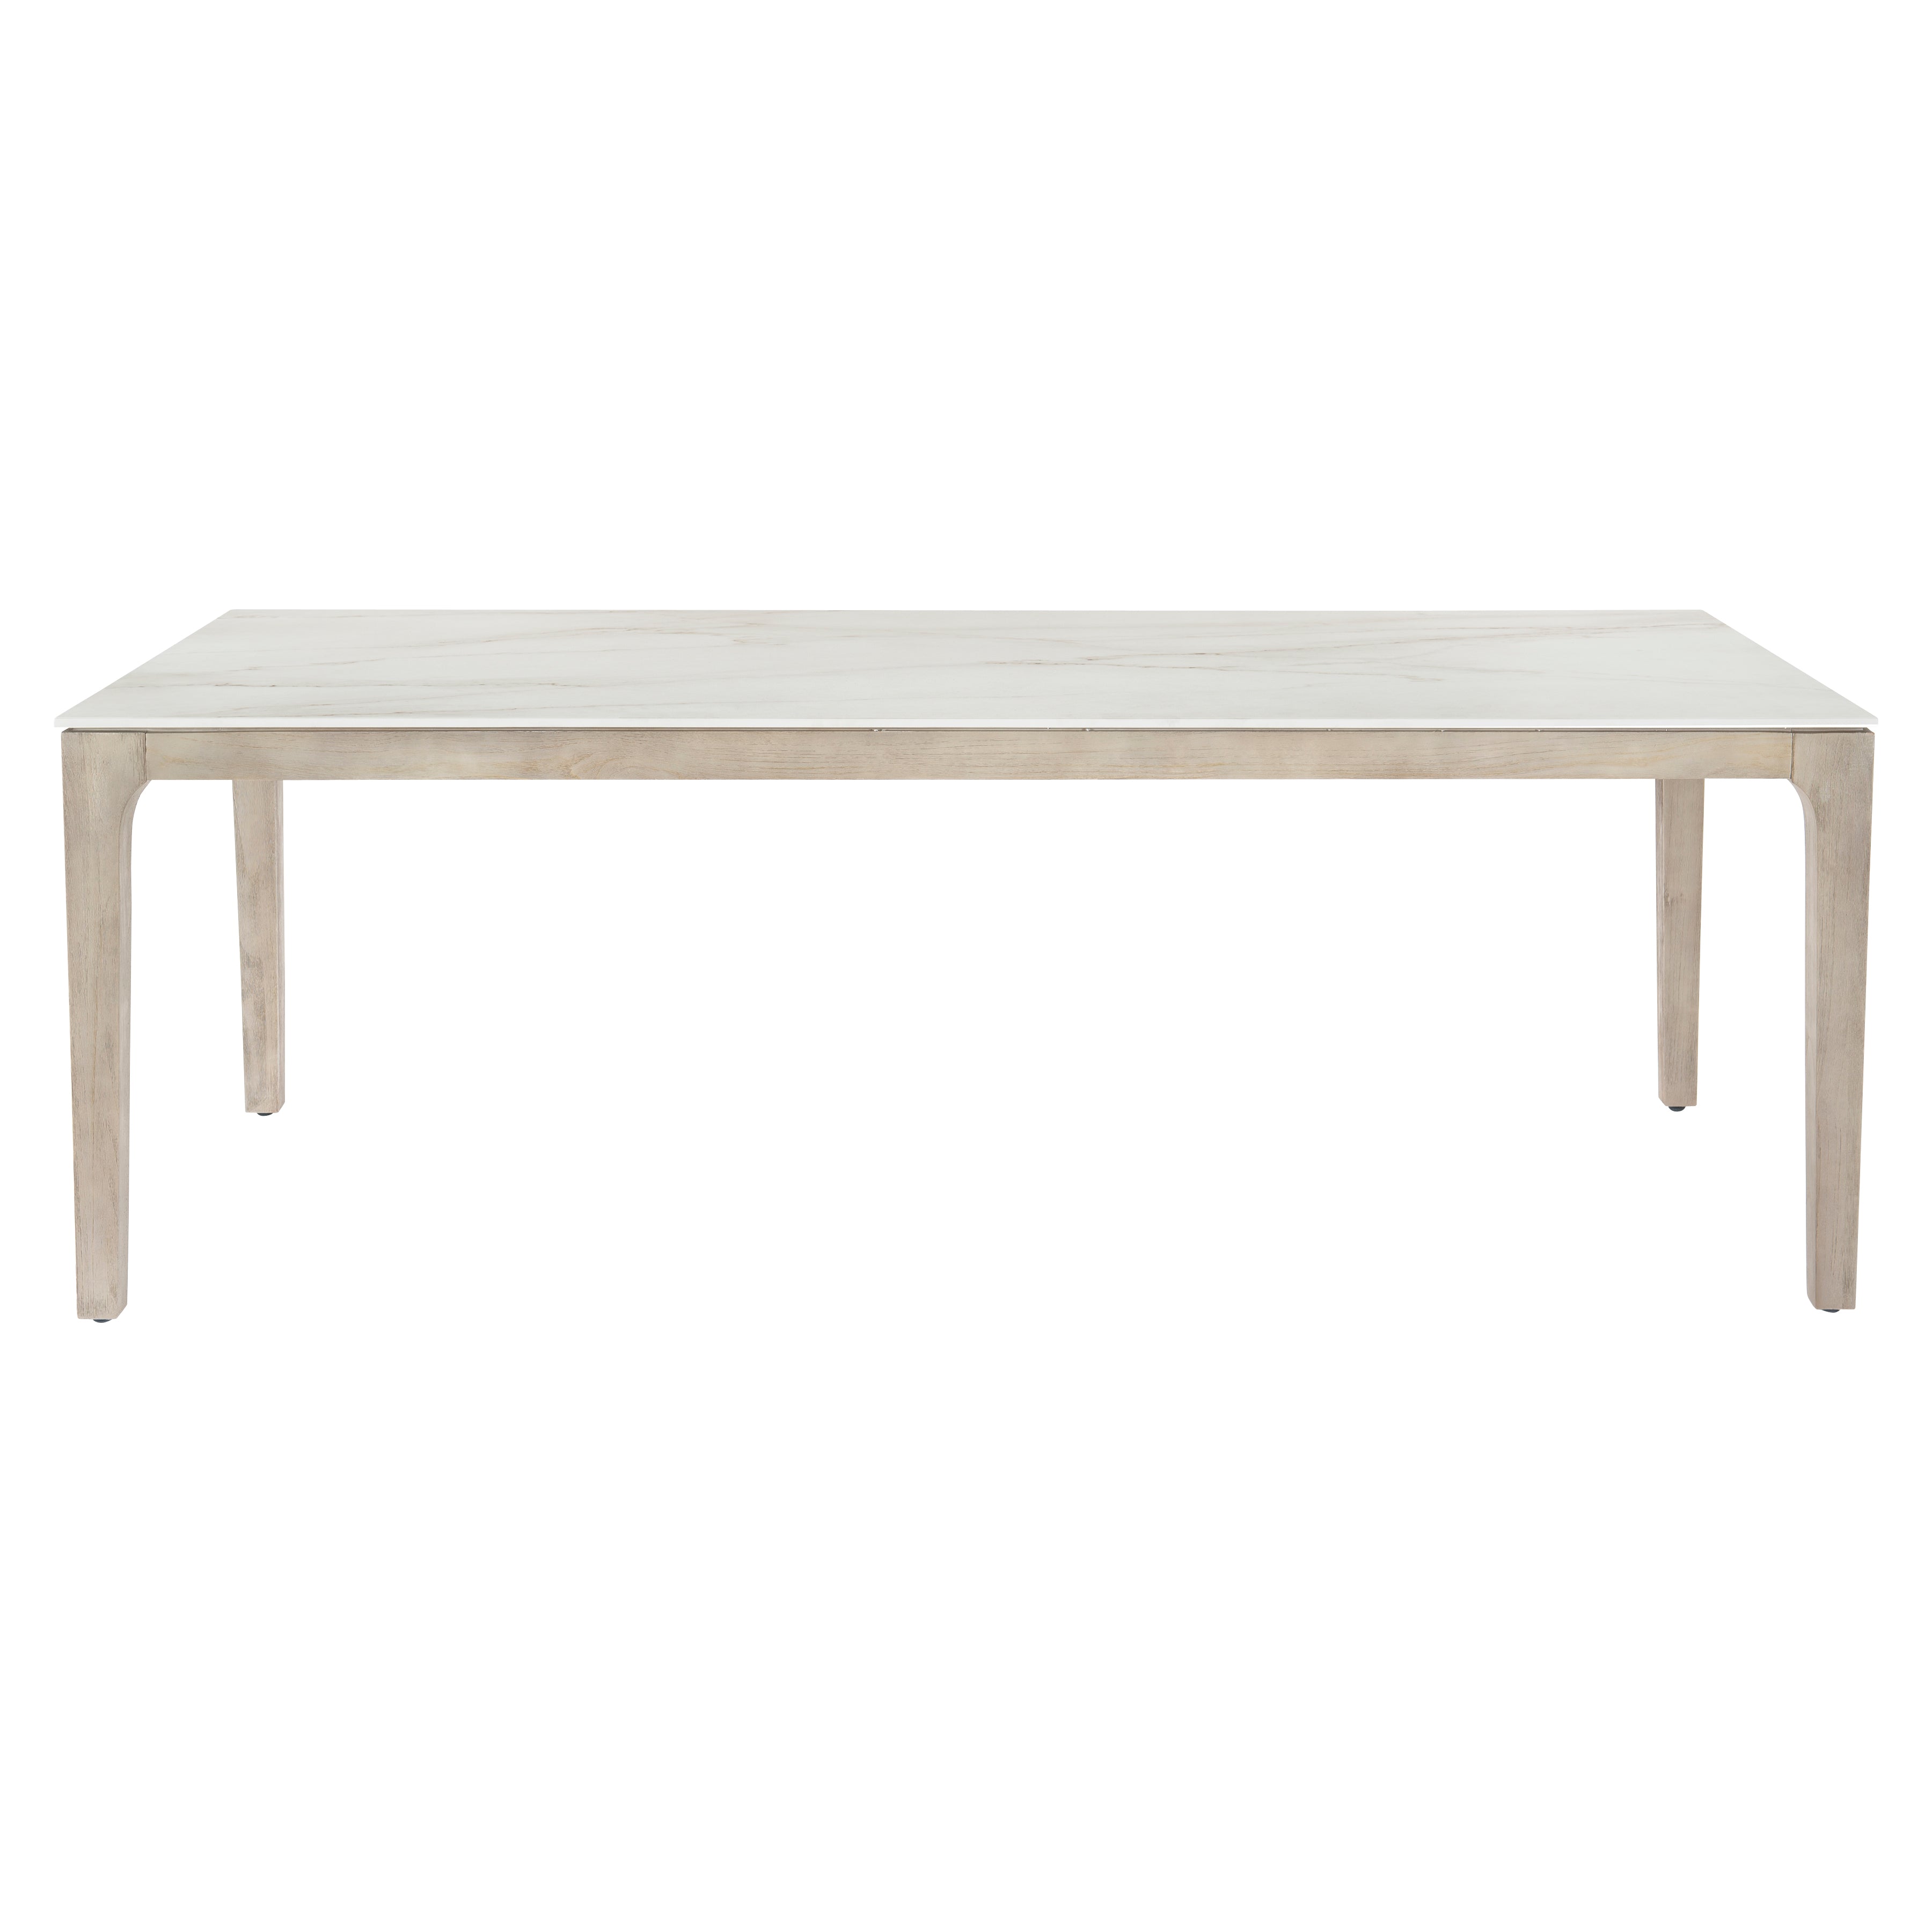 Marbella Outdoor Dining Table (85")